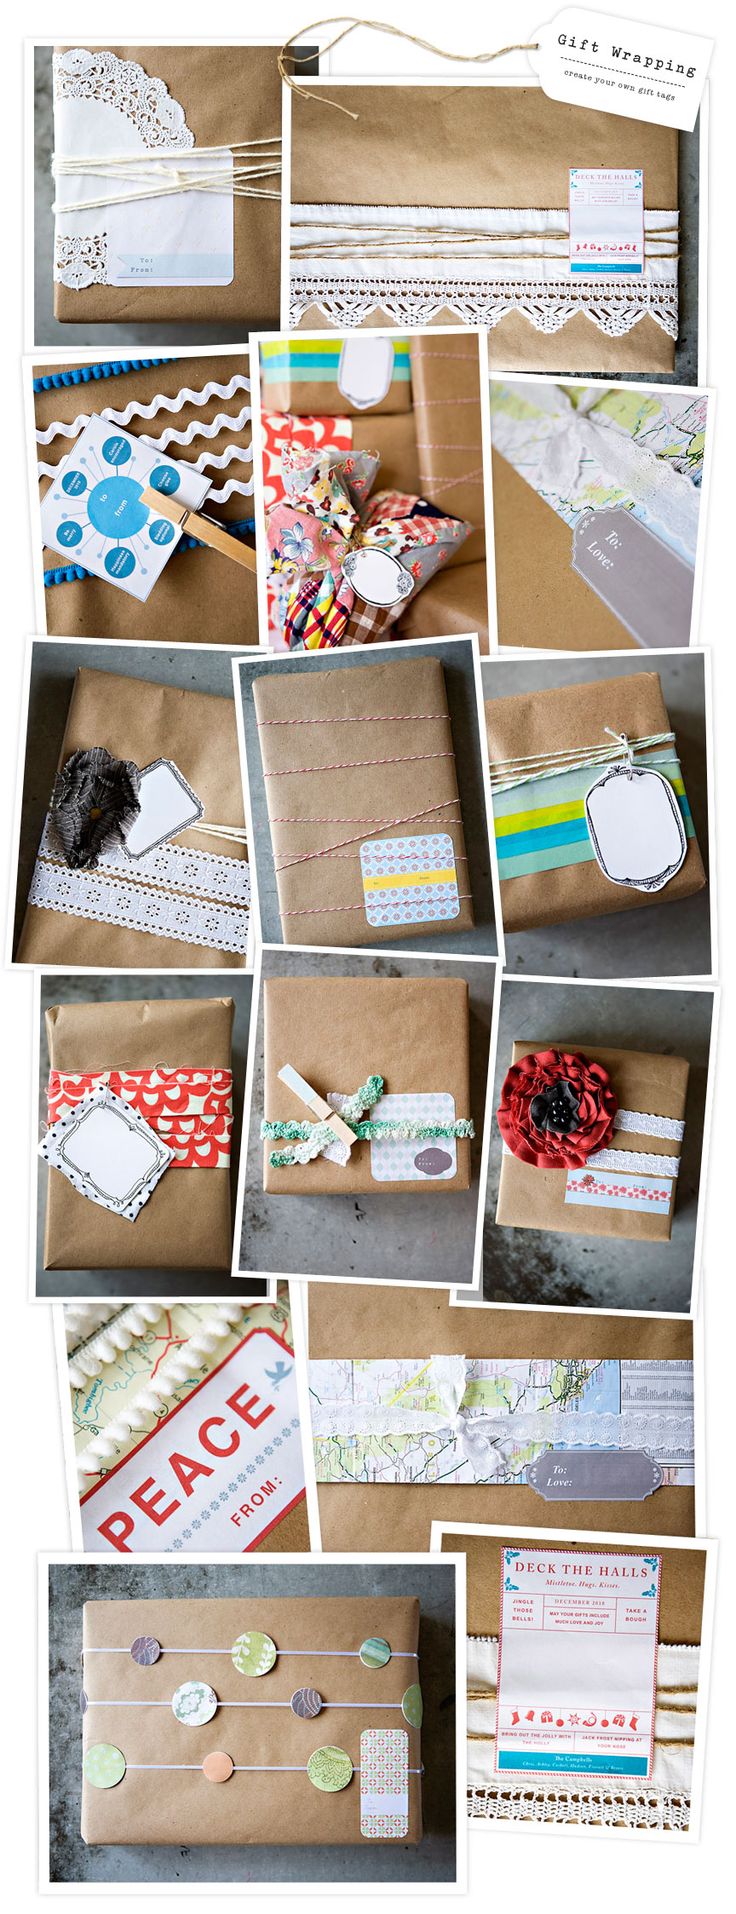 so many cute ideas for gift wrapping with kraft paper